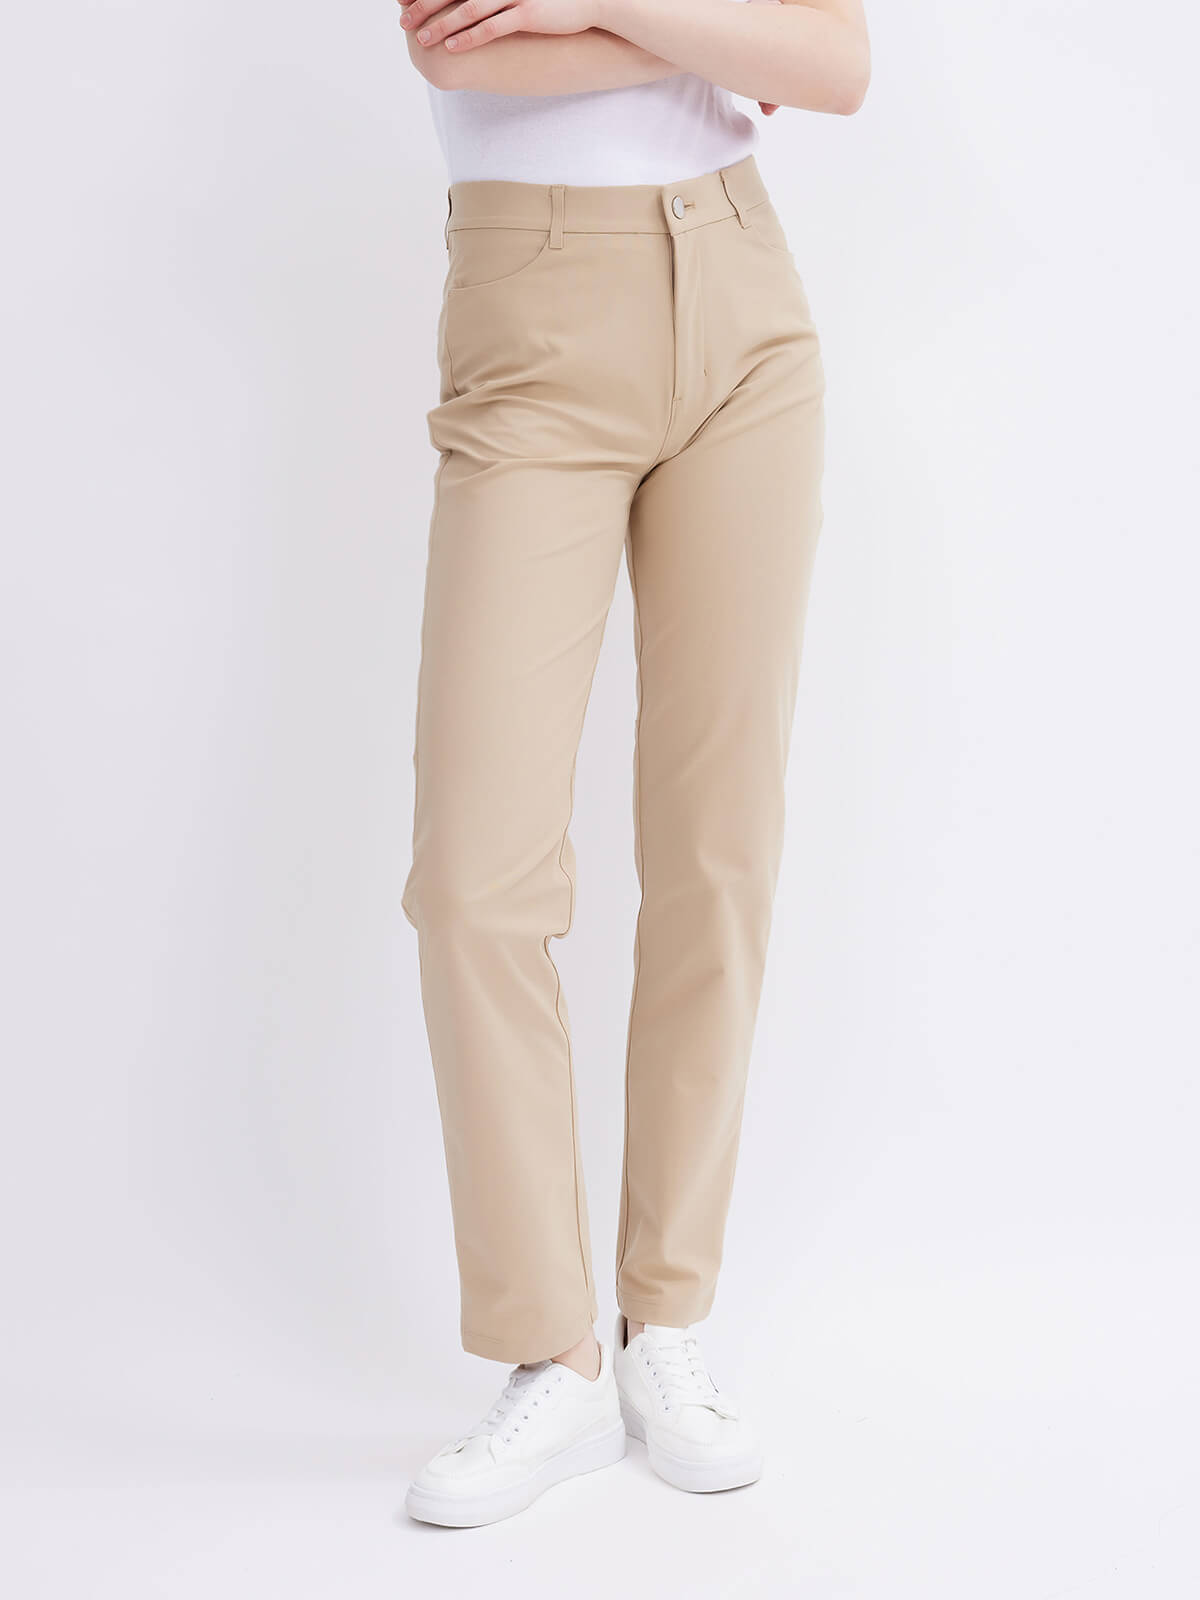 Relaxed Fit Wrinkle Free Straight Leg Pants